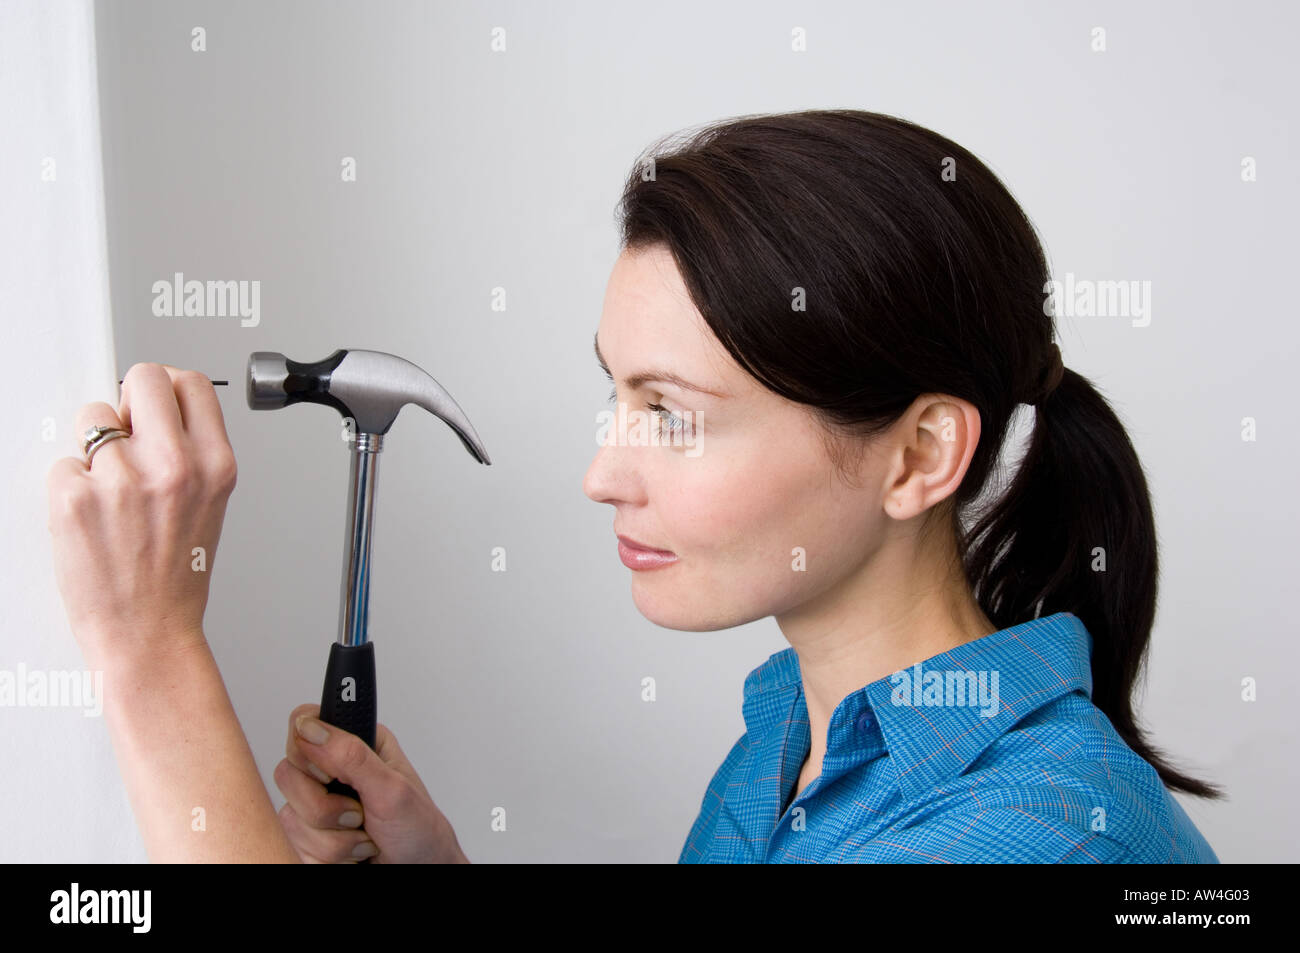 woman hammering a nail into the wall Stock Photo